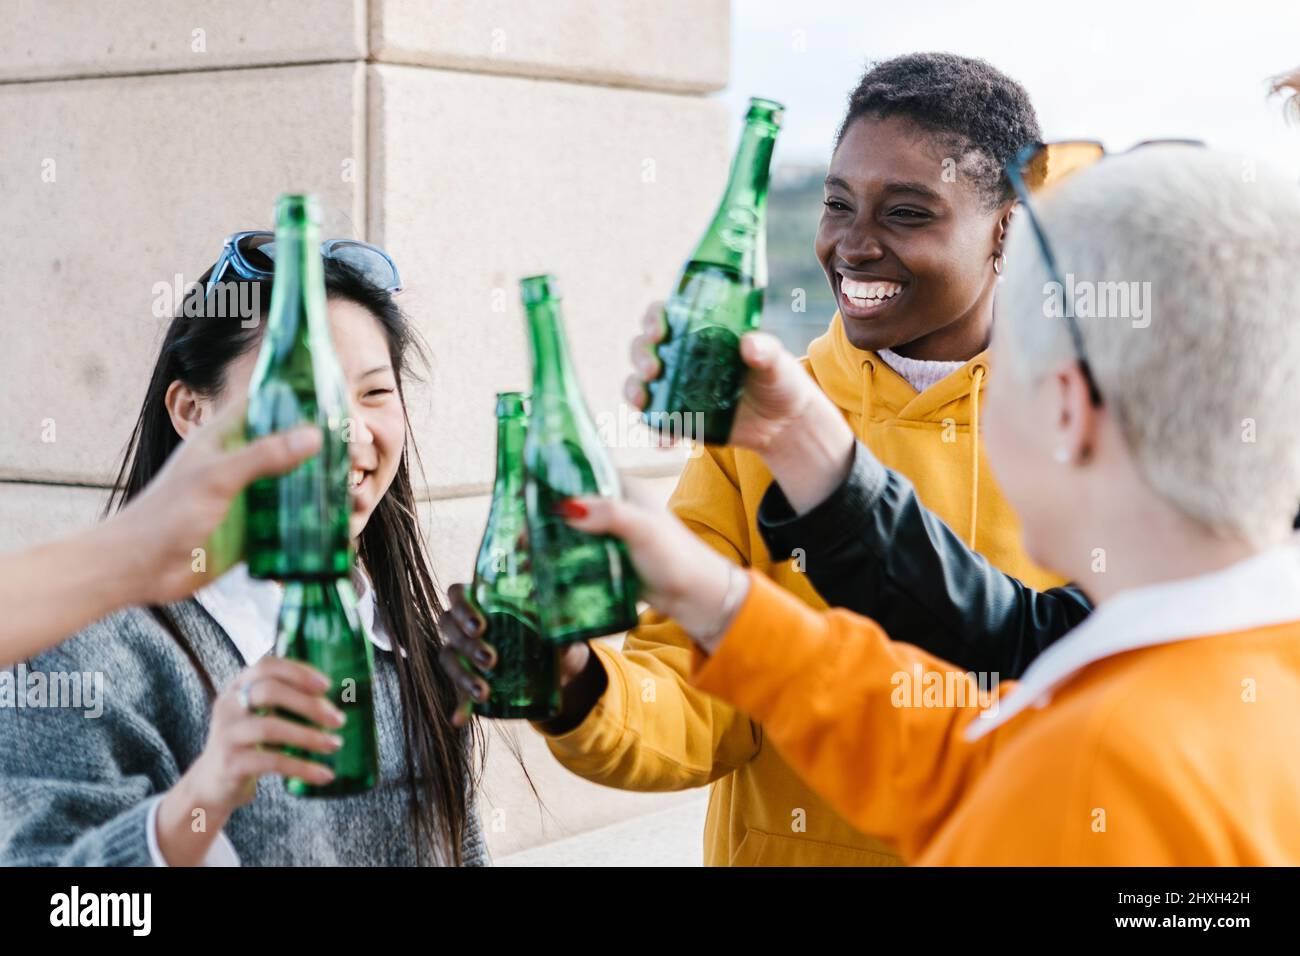 Happy millennial friends drinking together outdoors Stock Photo